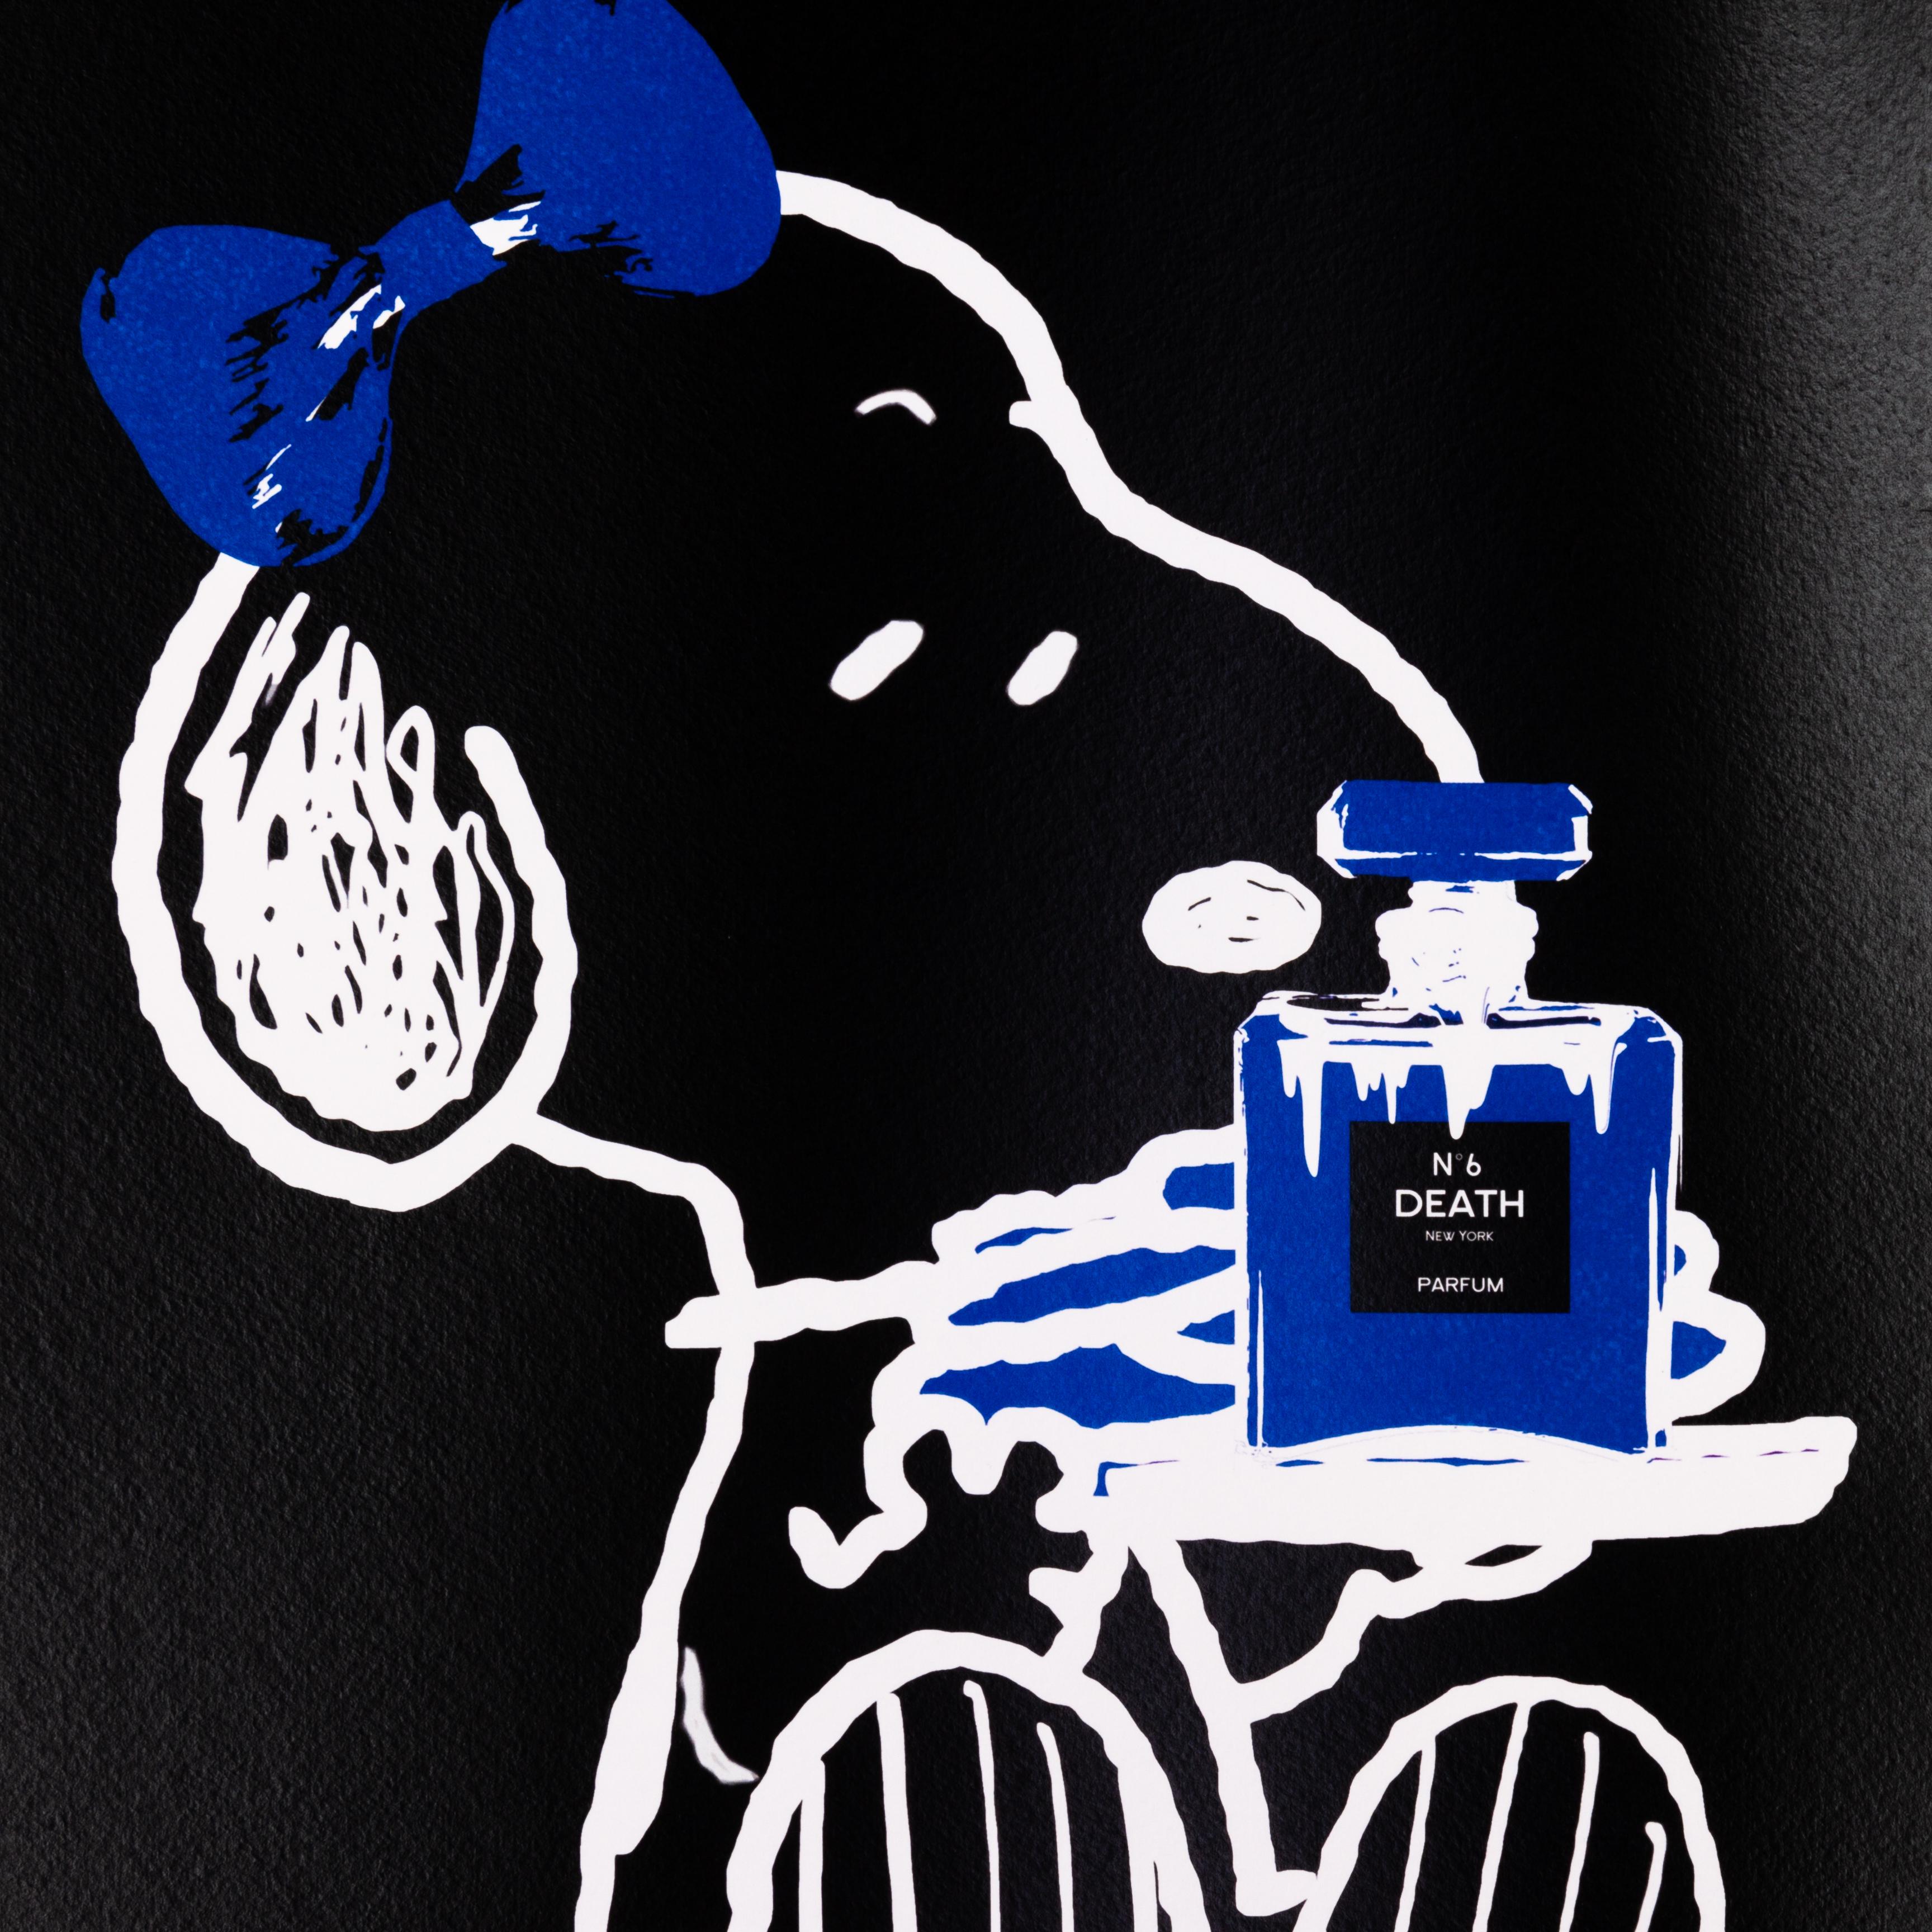 Death NYC Signed Limited Ed Pop Art Print Snoopy Perfume
From a private English collection
Free international shipping

